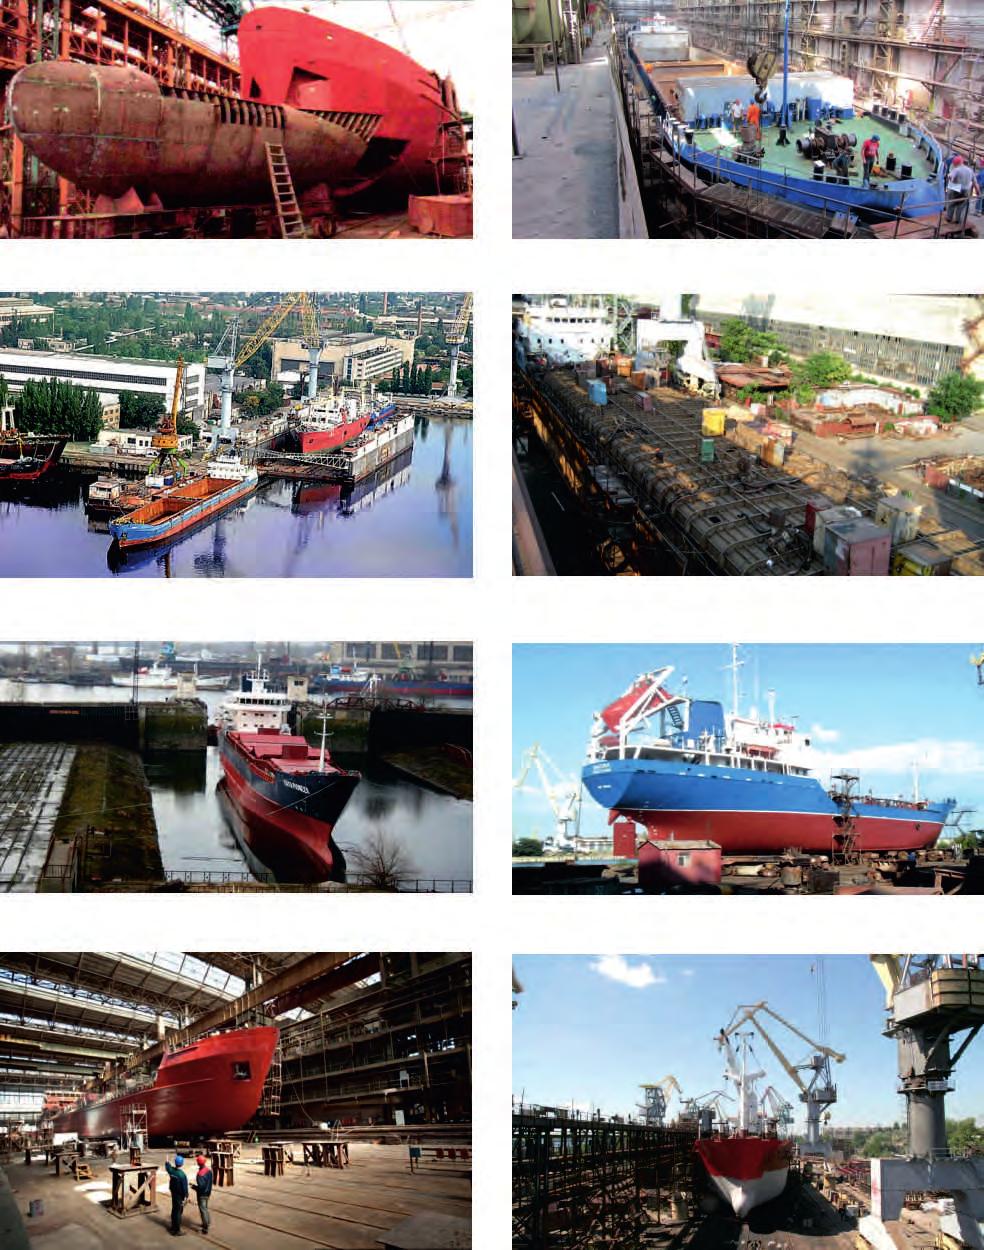 - Shiprepair and Conversion Annually about 60 vessels of various types undergo repair and conversion on the shipyards slipways.